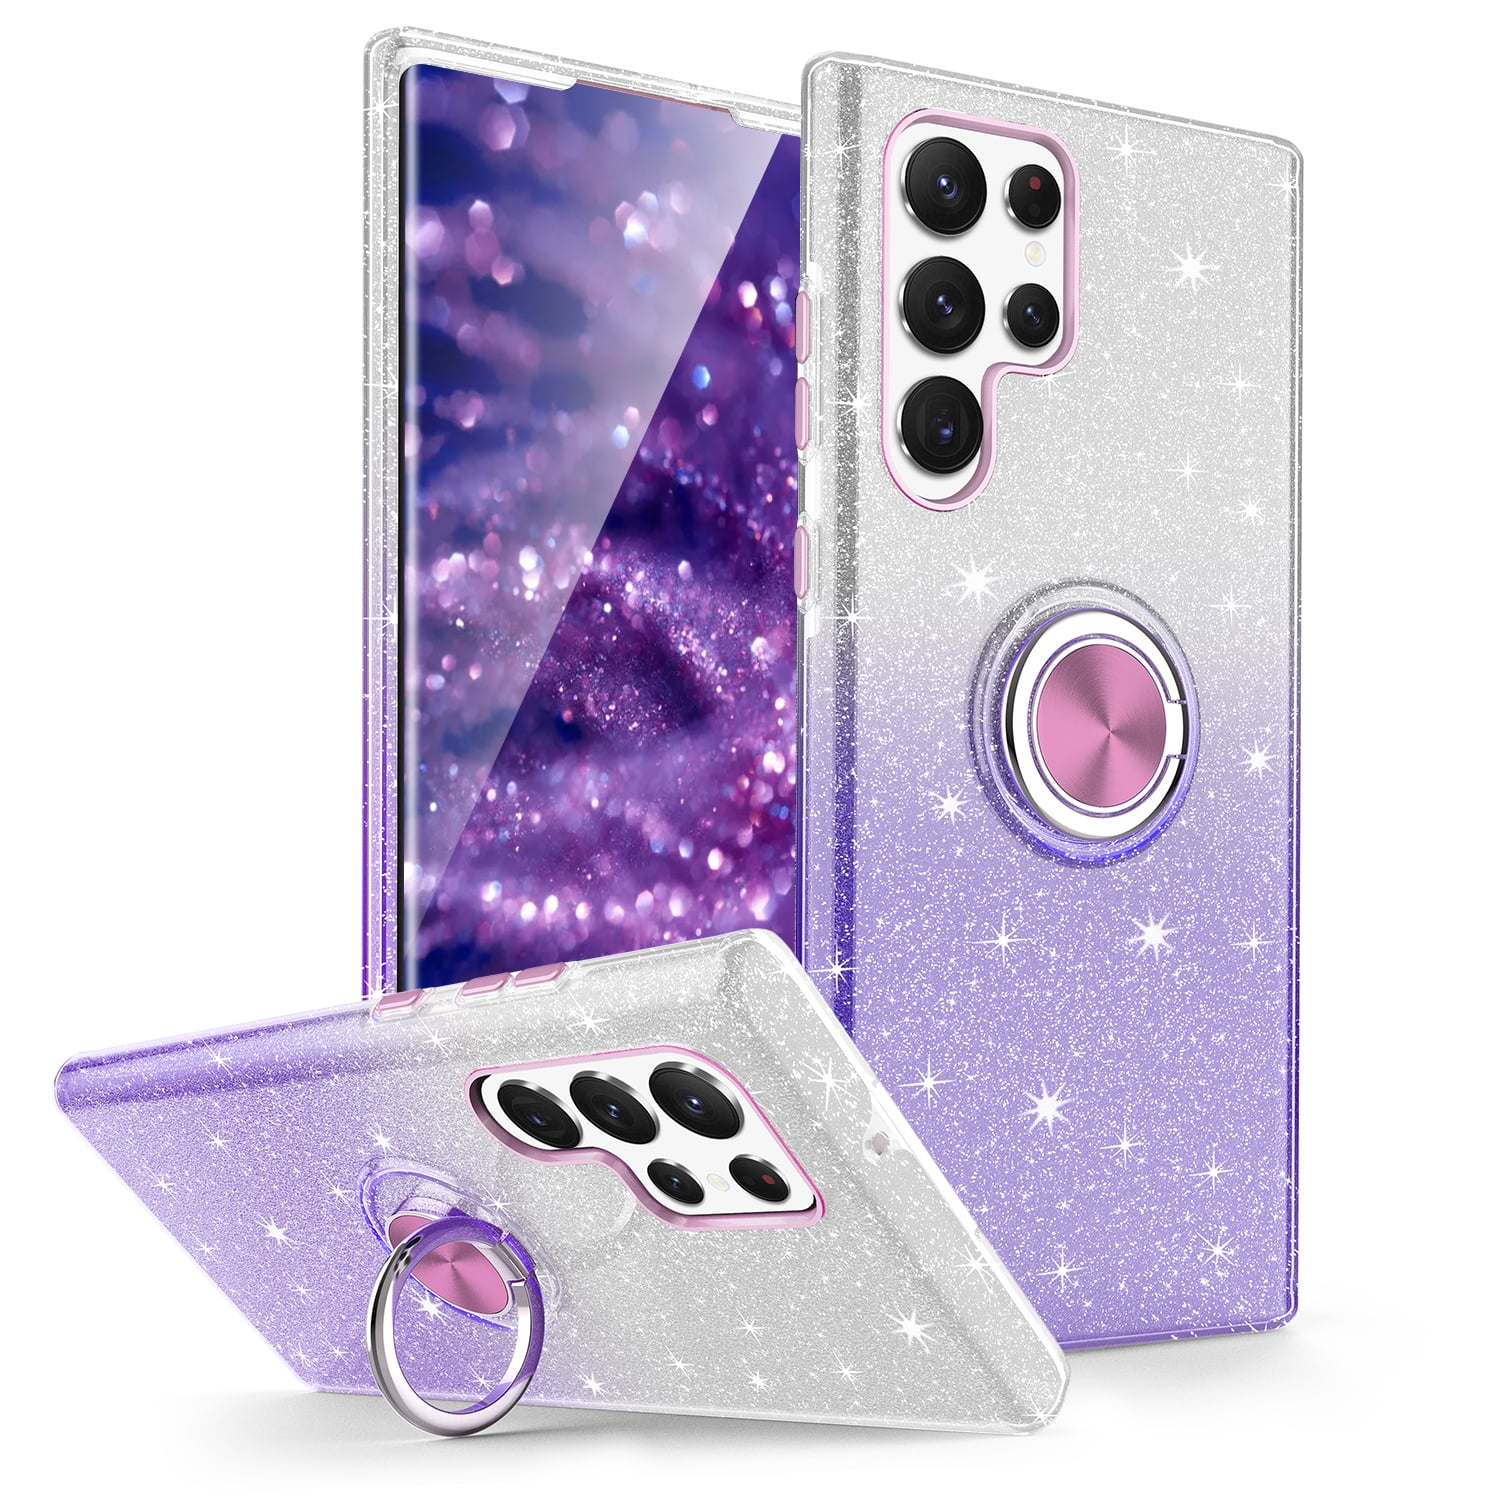 Wholesale Glittery Powder Design Electroplating TPU Phone Case with Metal  Kickstand [Built in Magnetic Metal Sheet] for Xiaomi Mi 10 Pro / Mi 10 -  Purple from China